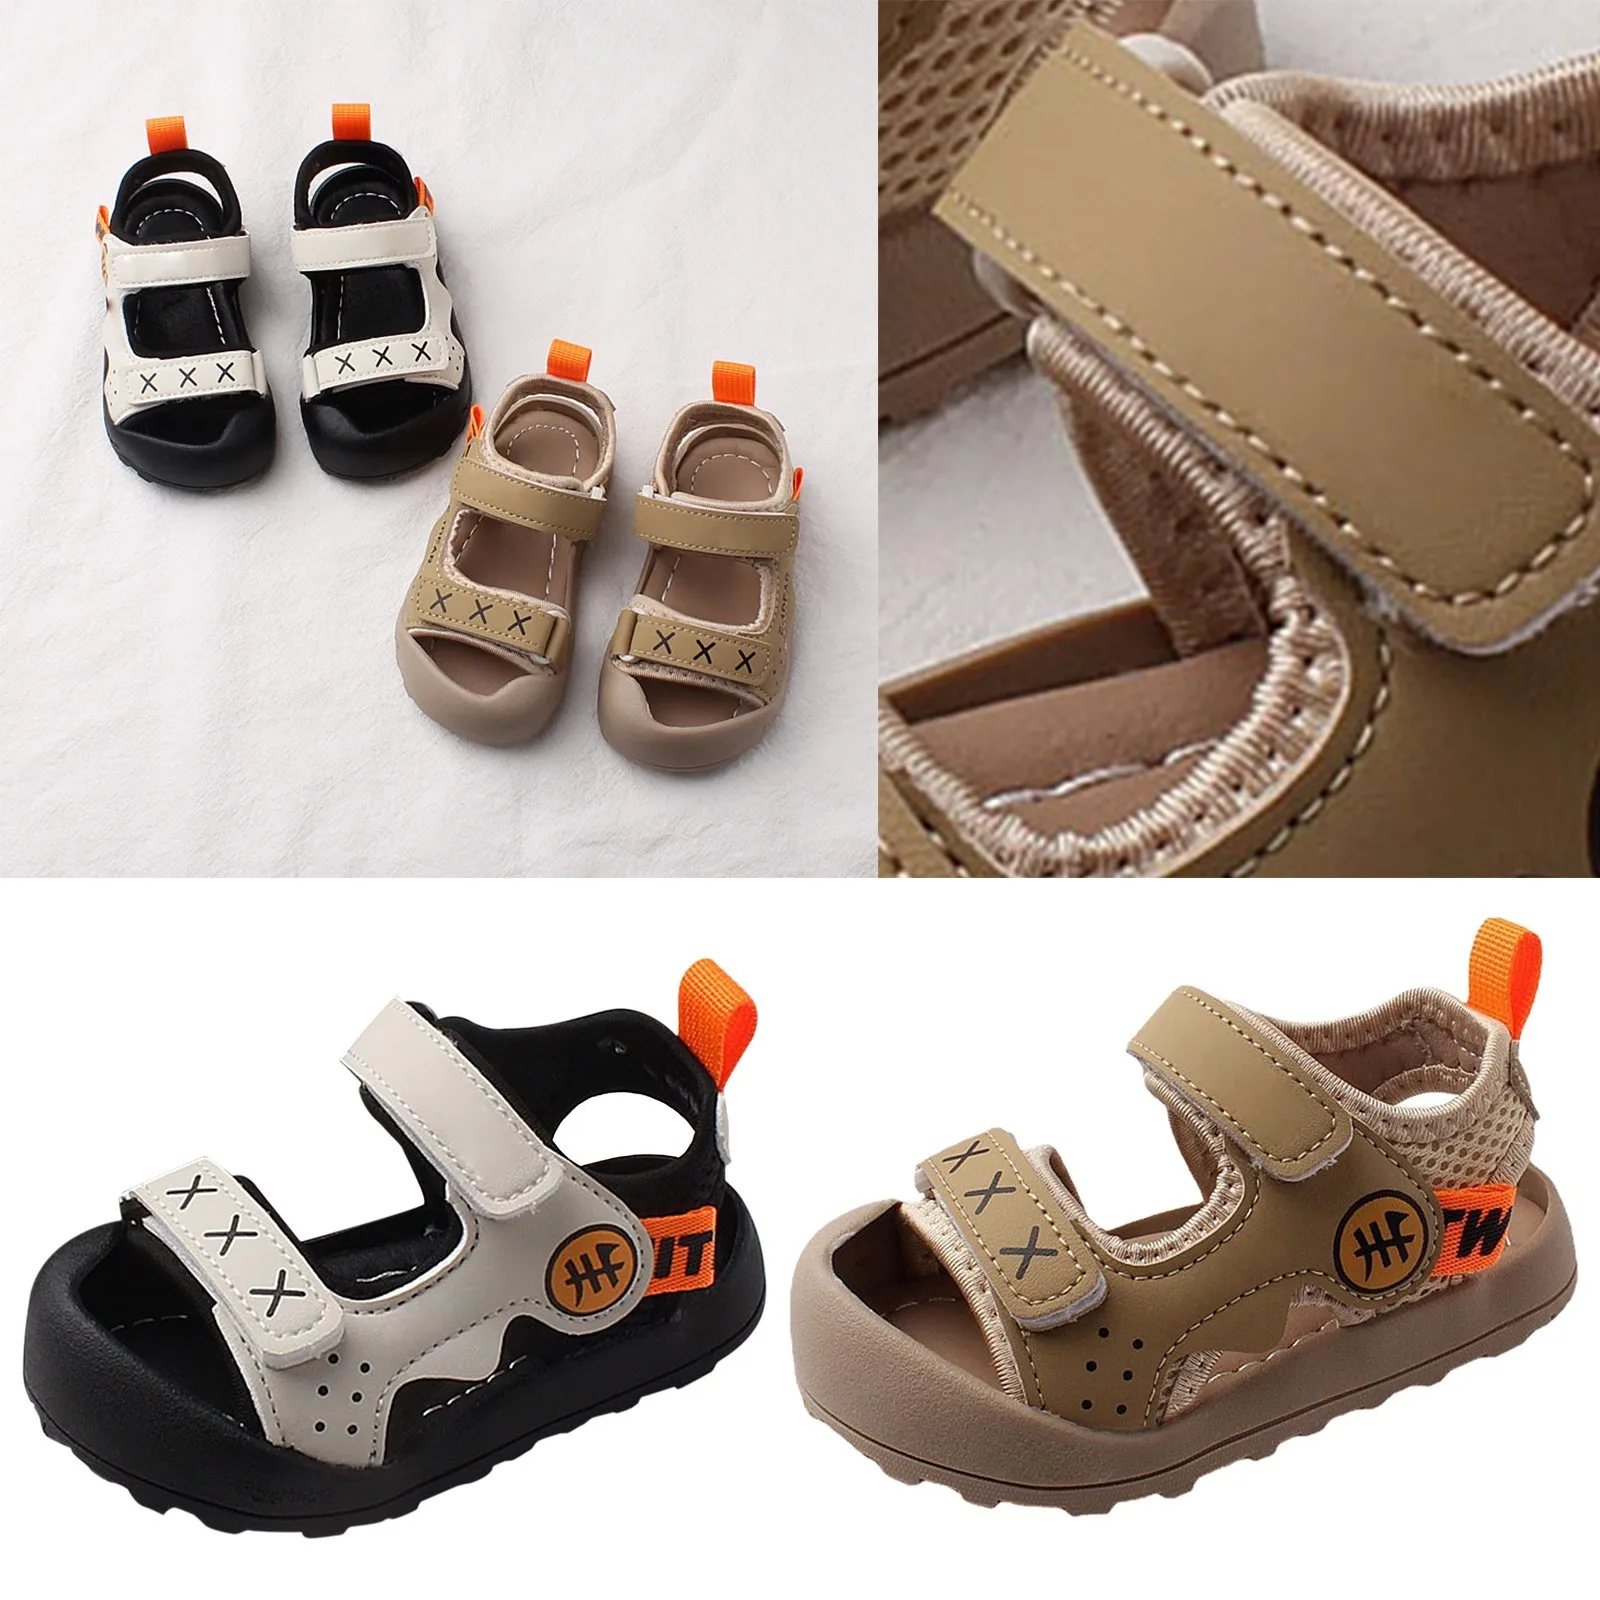 

Baby Shoes 13 Year Old Boys' Baotou Sandals Walking Shoes Soft Sole Baby Sandals Female Kindergarten Girls Jelly Sandals Size 9